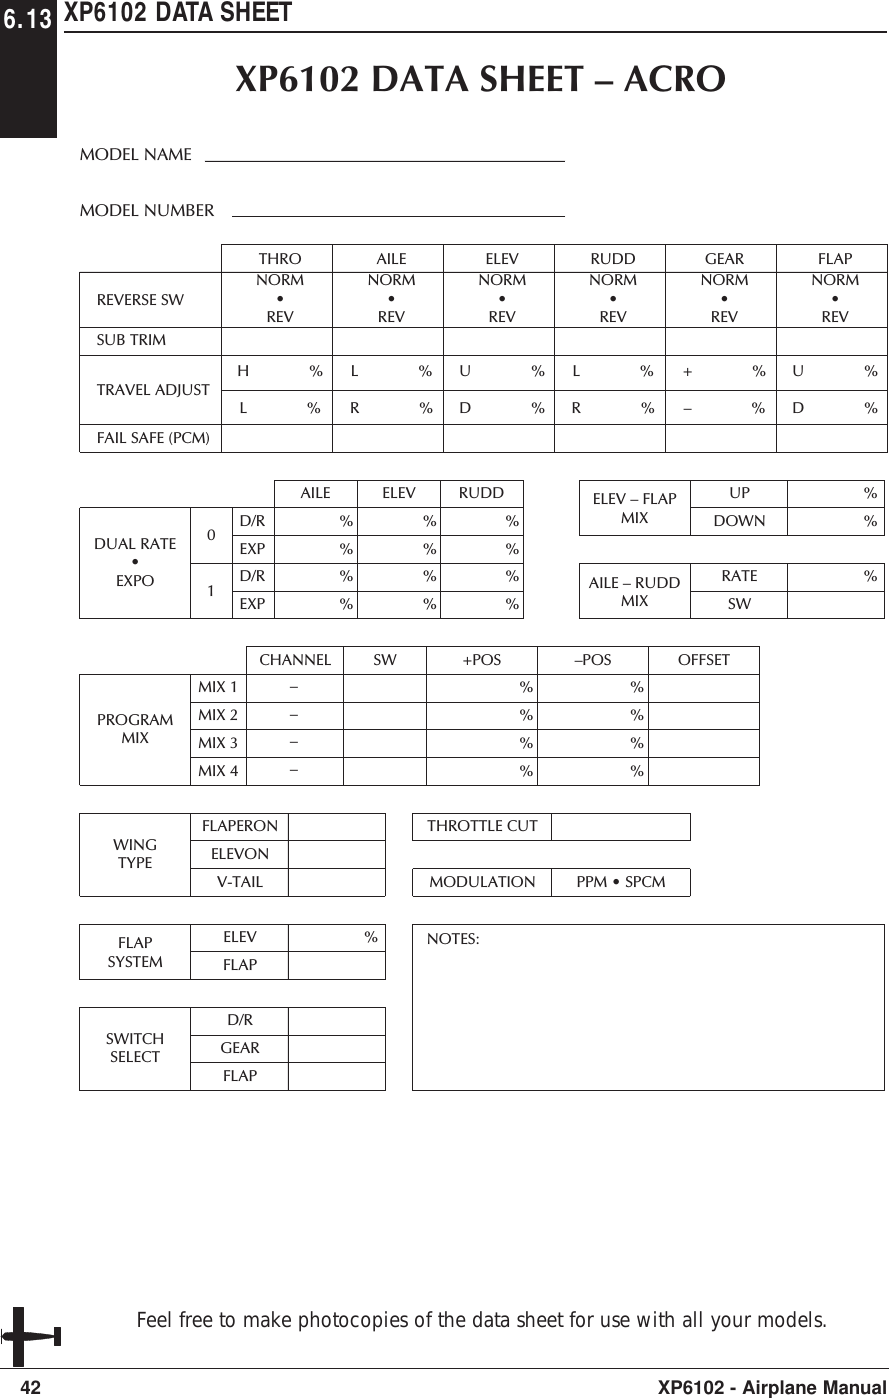 XP6102 DATA SHEET42 XP6102 - Airplane ManualREVERSE SWTHROTRAVEL ADJUSTFAIL SAFE (PCM)SUB TRIMH              % L              %NORM•REVAILEL              %R              %NORM•REVELEVU              %D              %NORM•REVRUDDL              %R              %NORM•REVGEAR+              %–              %NORM•REVFLAPU              % D              %NORM•REVAILEDUAL RATE•EXPO%%%%ELEV%%%%RUDD%%%%D/REXP%%UPDOWND/REXP01ELEV – FLAPMIX%RATESWAILE – RUDDMIX%ELEVFLAPFLAPSYSTEMD/RGEARFLAPSWITCHSELECTFLAPERONELEVONV-TAILWINGTYPECHANNELPROGRAMMIXSW +POS%%%%–POS OFFSET%%%%MIX 1MIX 2MIX 3MIX 4––––THROTTLE CUTMODULATIONNOTES:PPM • SPCMXP6102 DATA SHEET – ACROMODEL NUMBERMODEL NAME6.13Feel free to make photocopies of the data sheet for use with all your models.